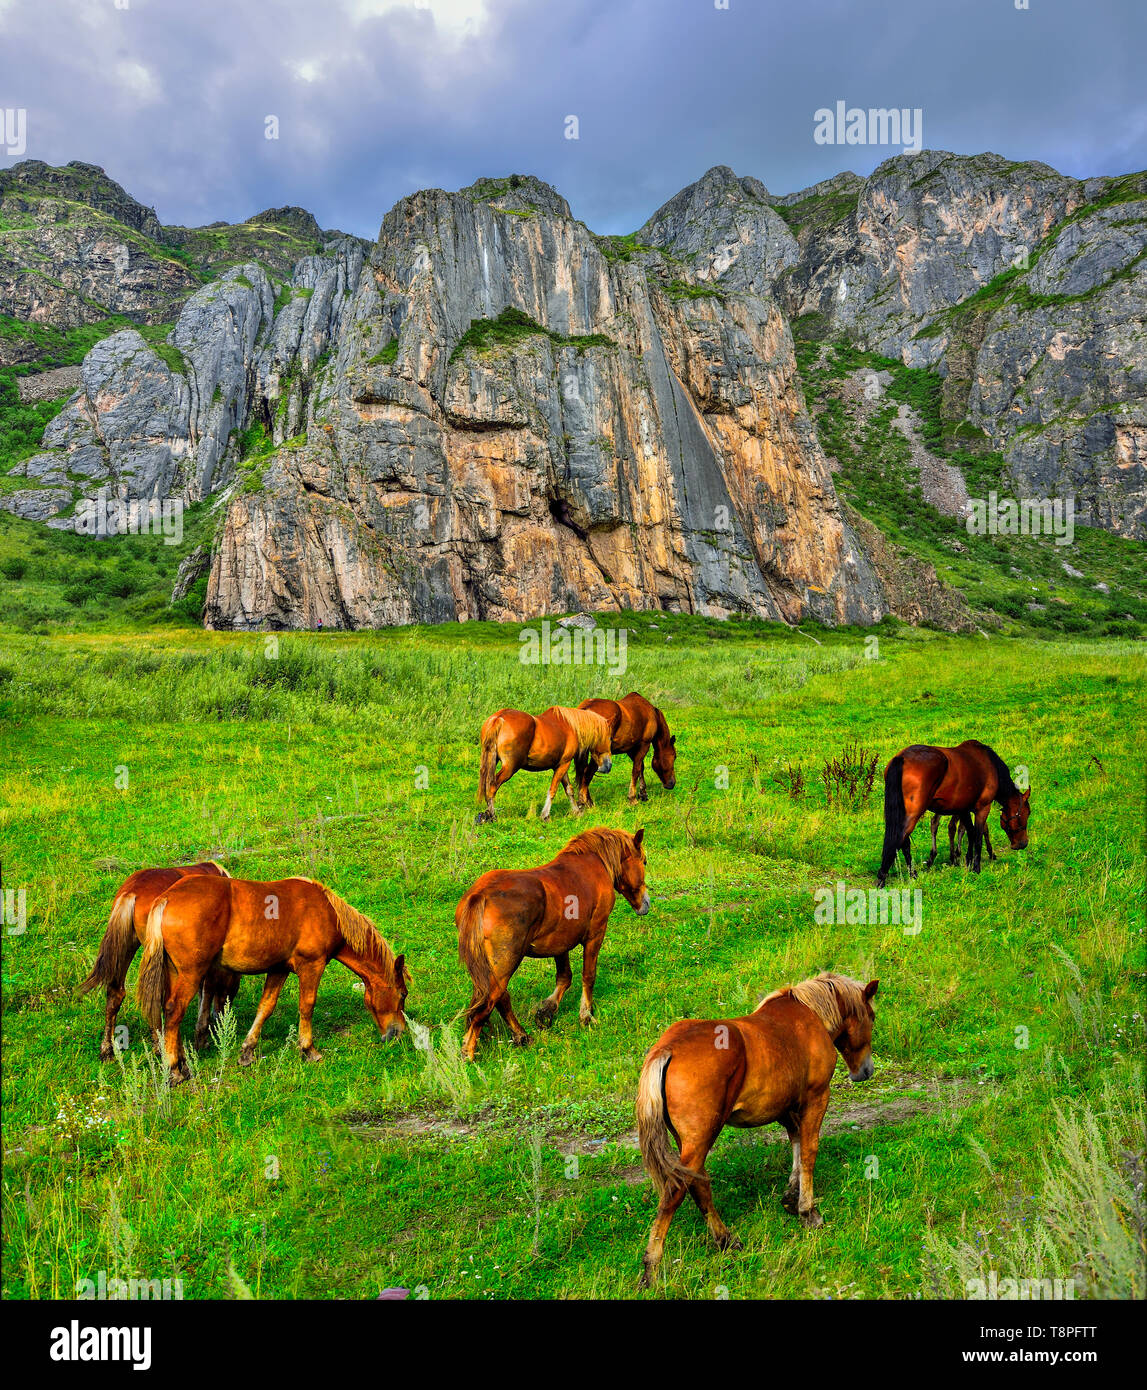 Herd of brown horses grazing in mountain valley near steep cliffs of old, weathered limestone in Altai mountains, Russia - summer cloudy landscape. Be Stock Photo